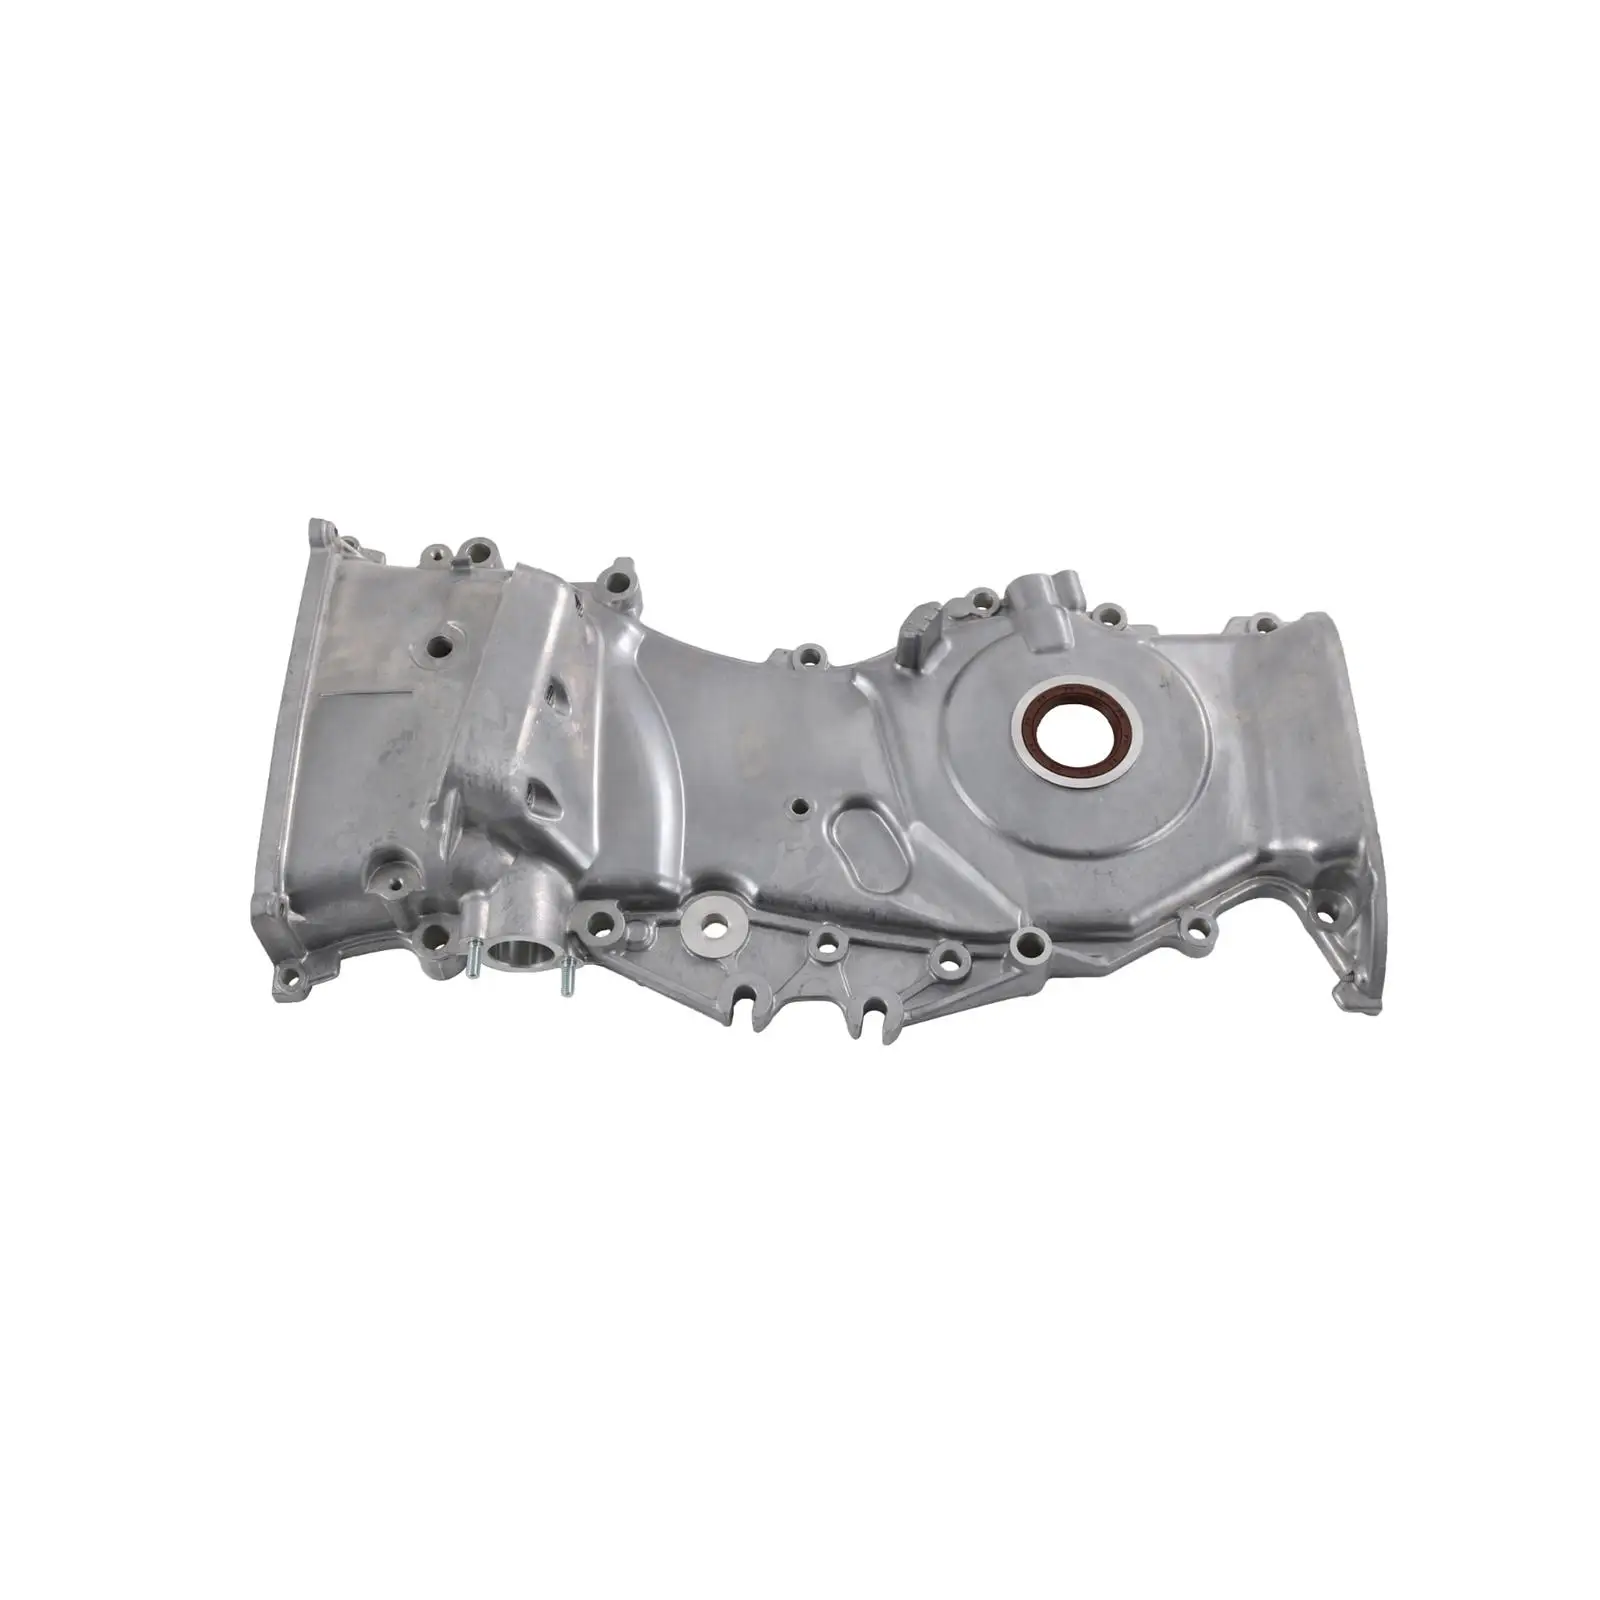 Timing Cover 2azfe 1131028071 for Toyota for camry for highlander Solara Automobile Repairing Accessory Metal Stable Performance